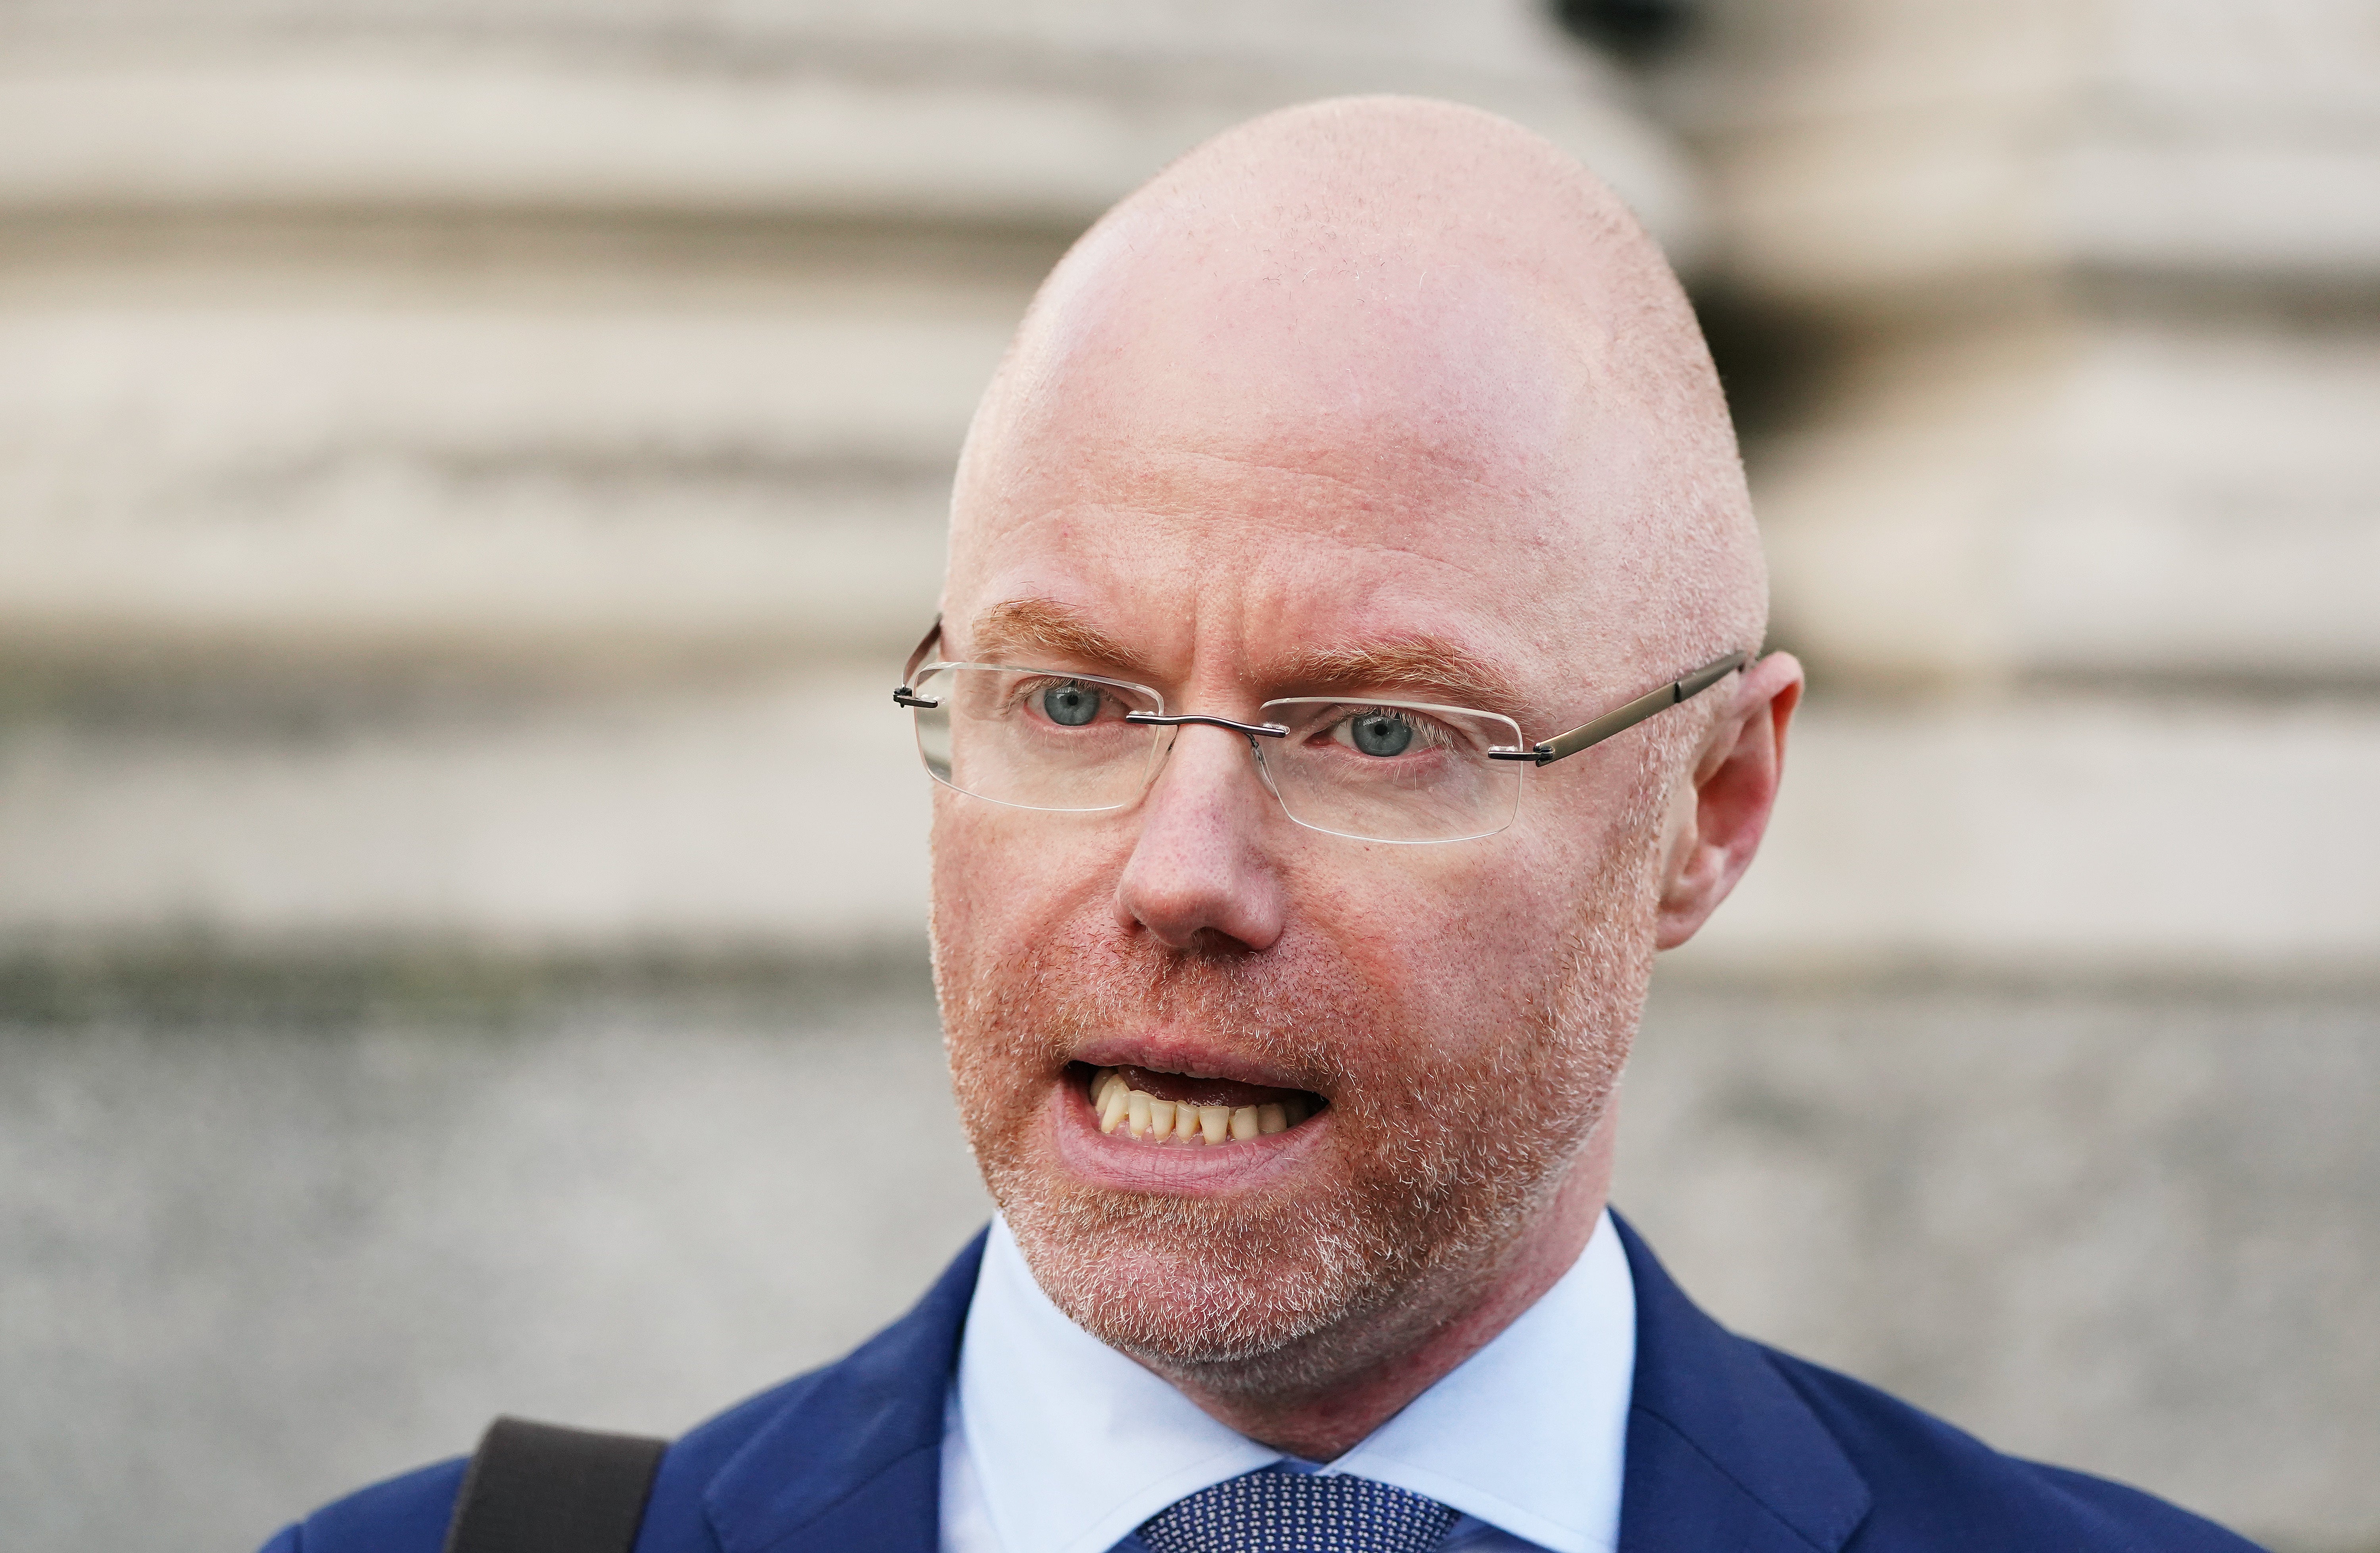 Minister for Health Stephen Donnelly said the plan would ‘improve outcomes for people who need to engage with our public health service’ (Brian Lawless/PA)